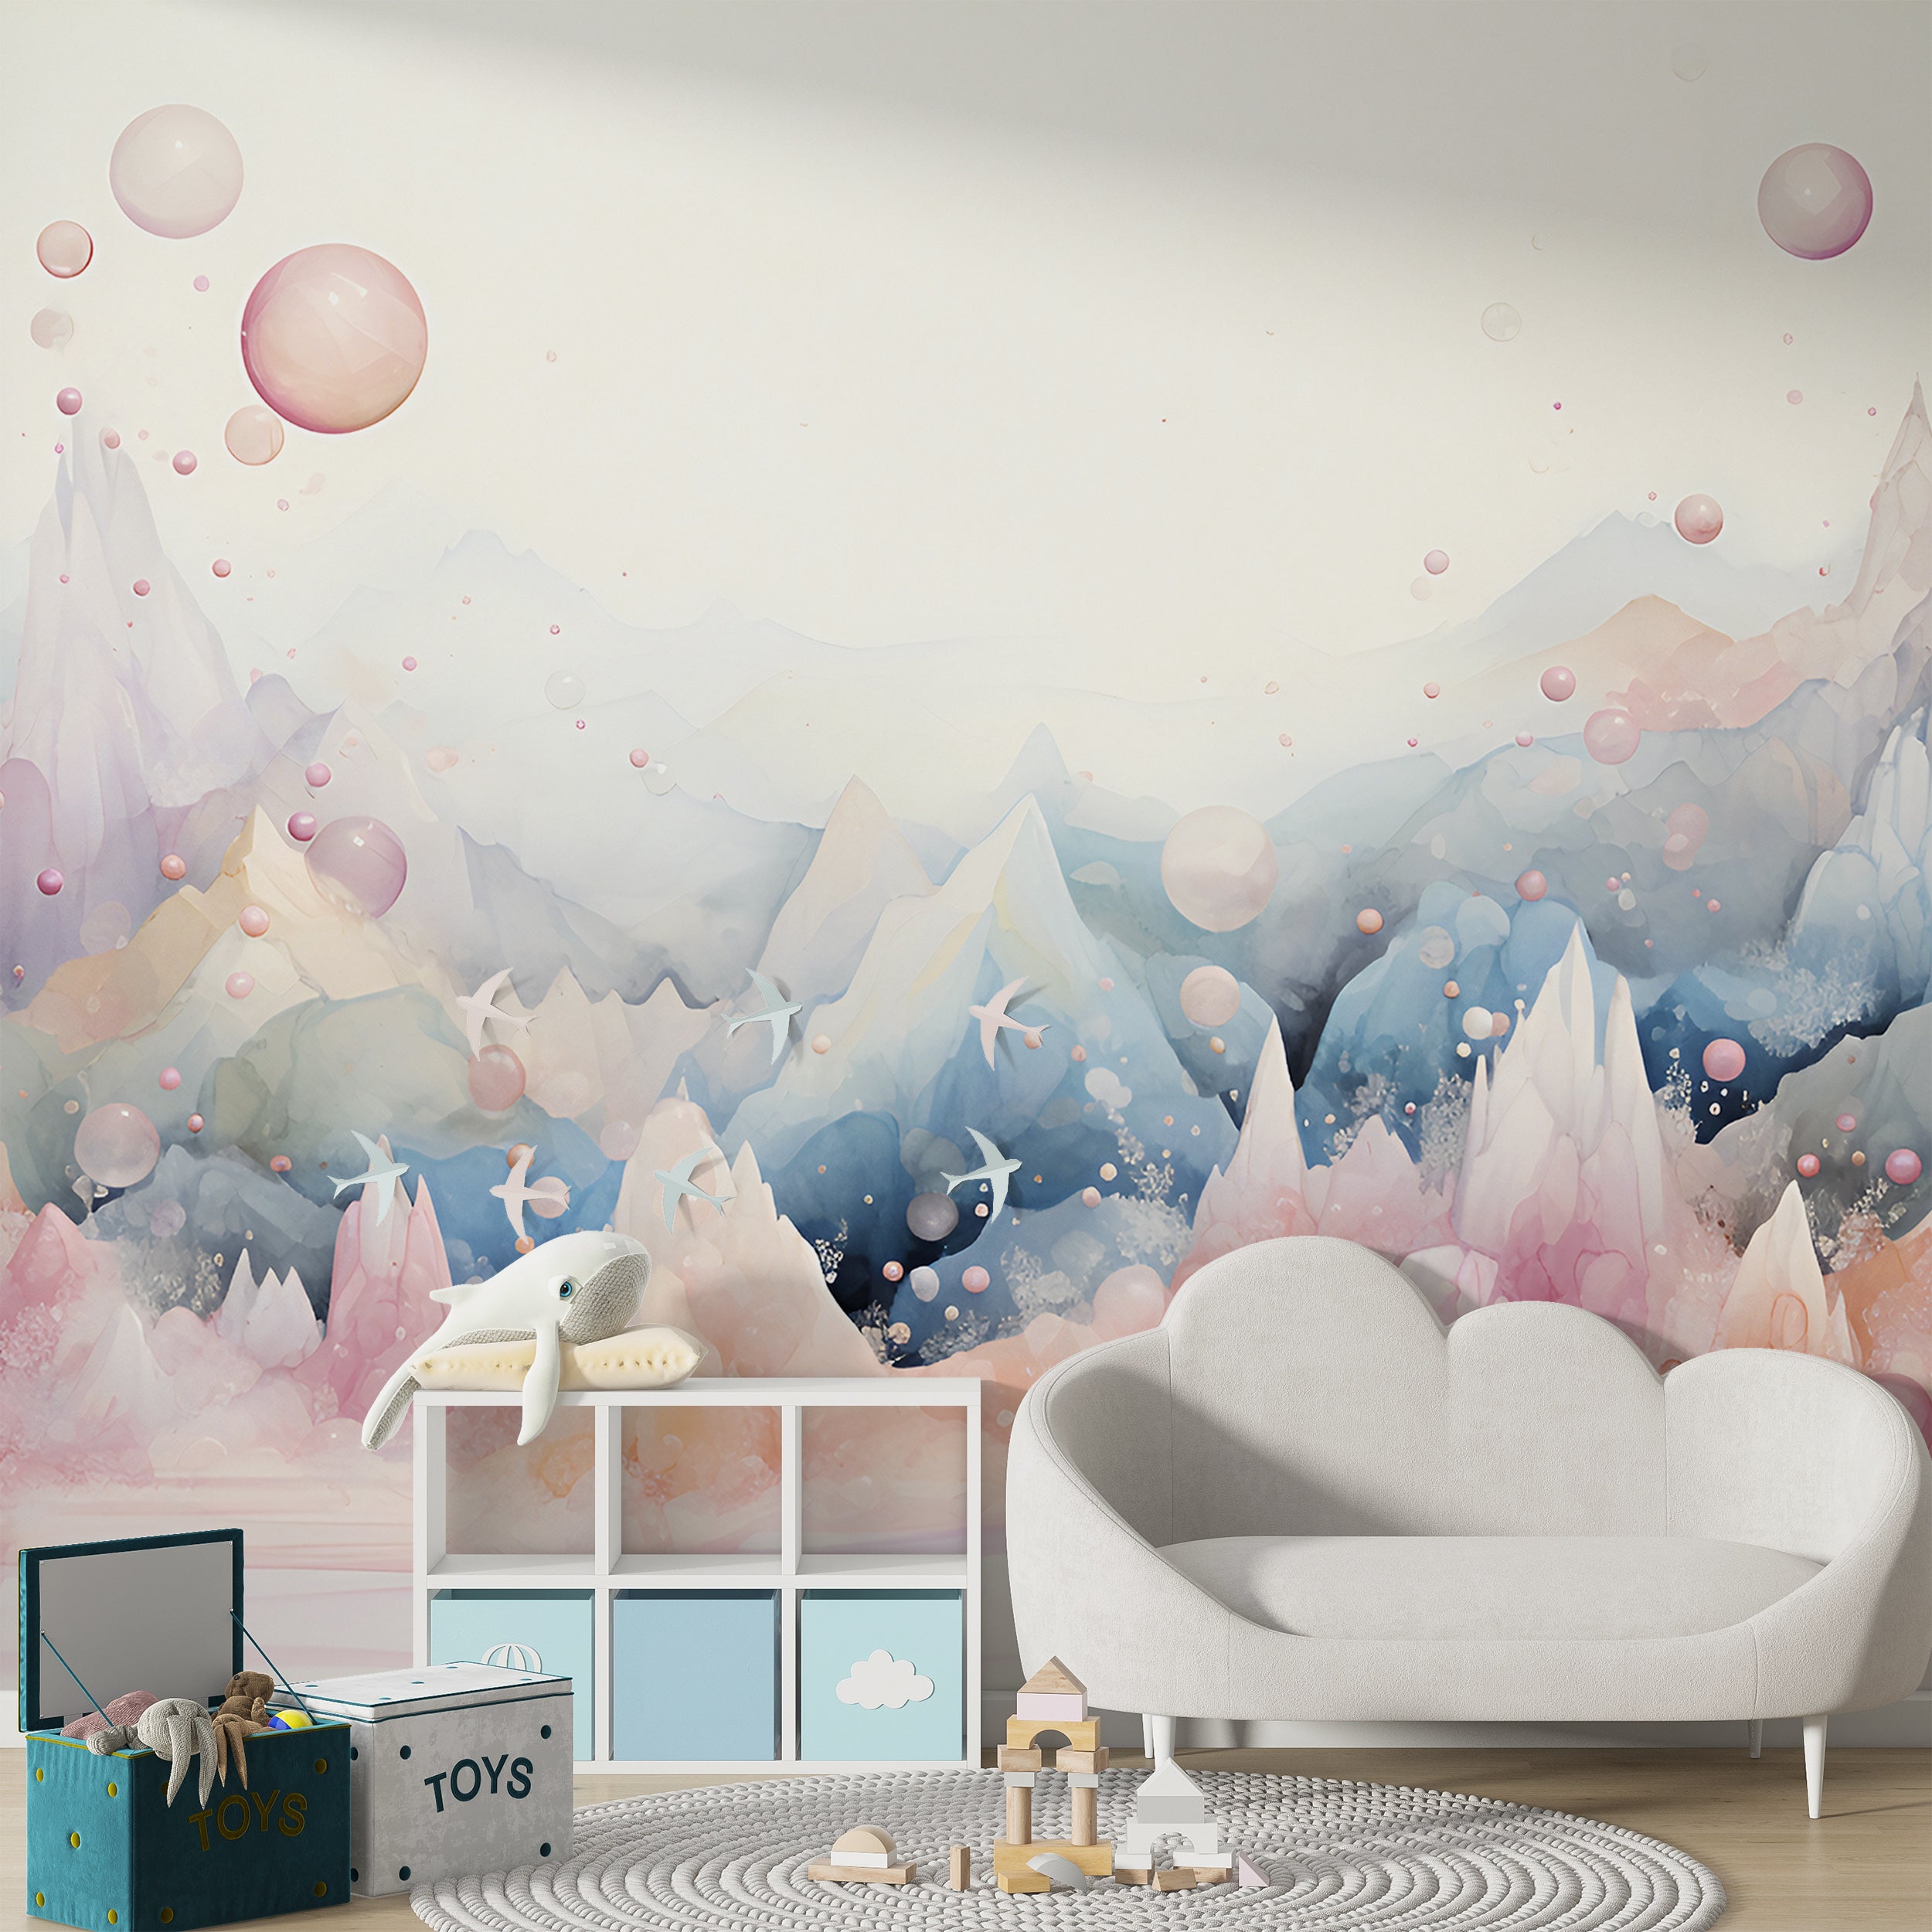 Transform Your Nursery with Dreamy Mountains